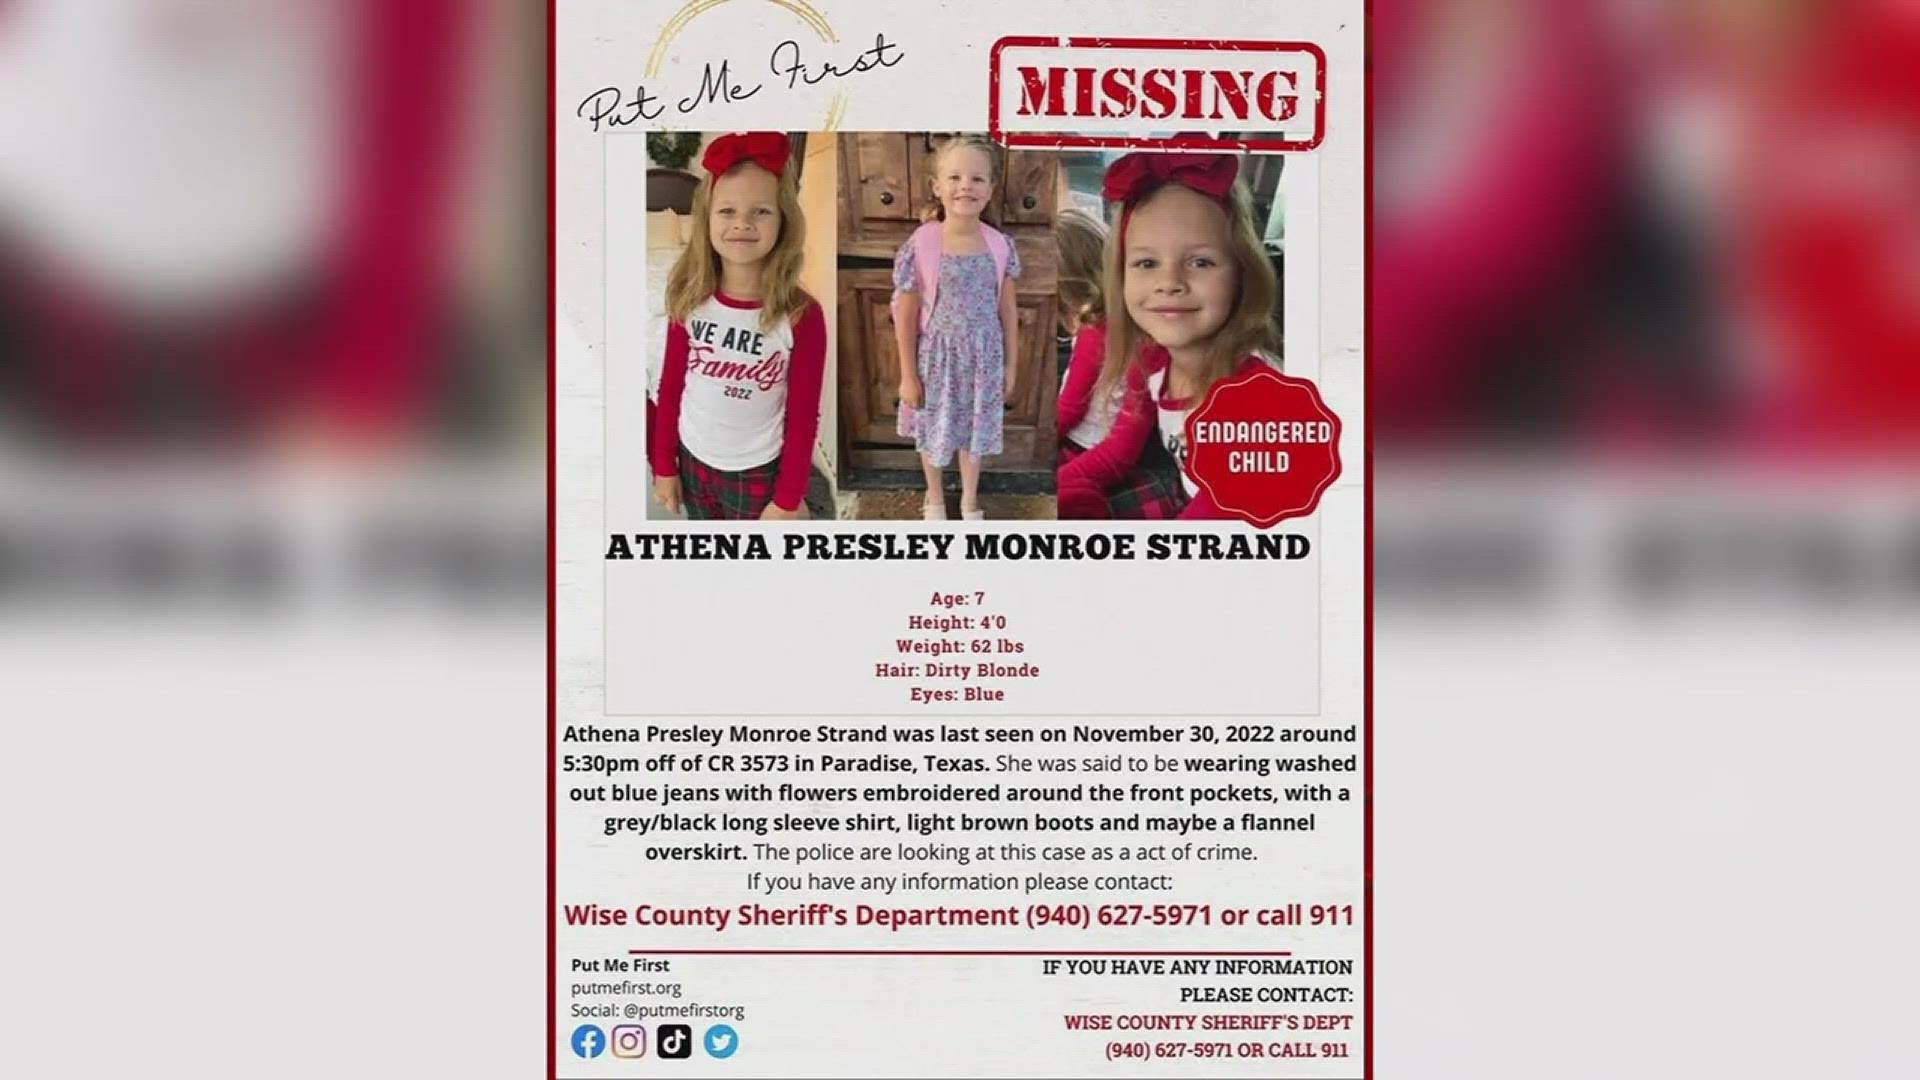 The new alert would use the Amber Alert system to notify people within 100 miles radius of any reported child disappearance.